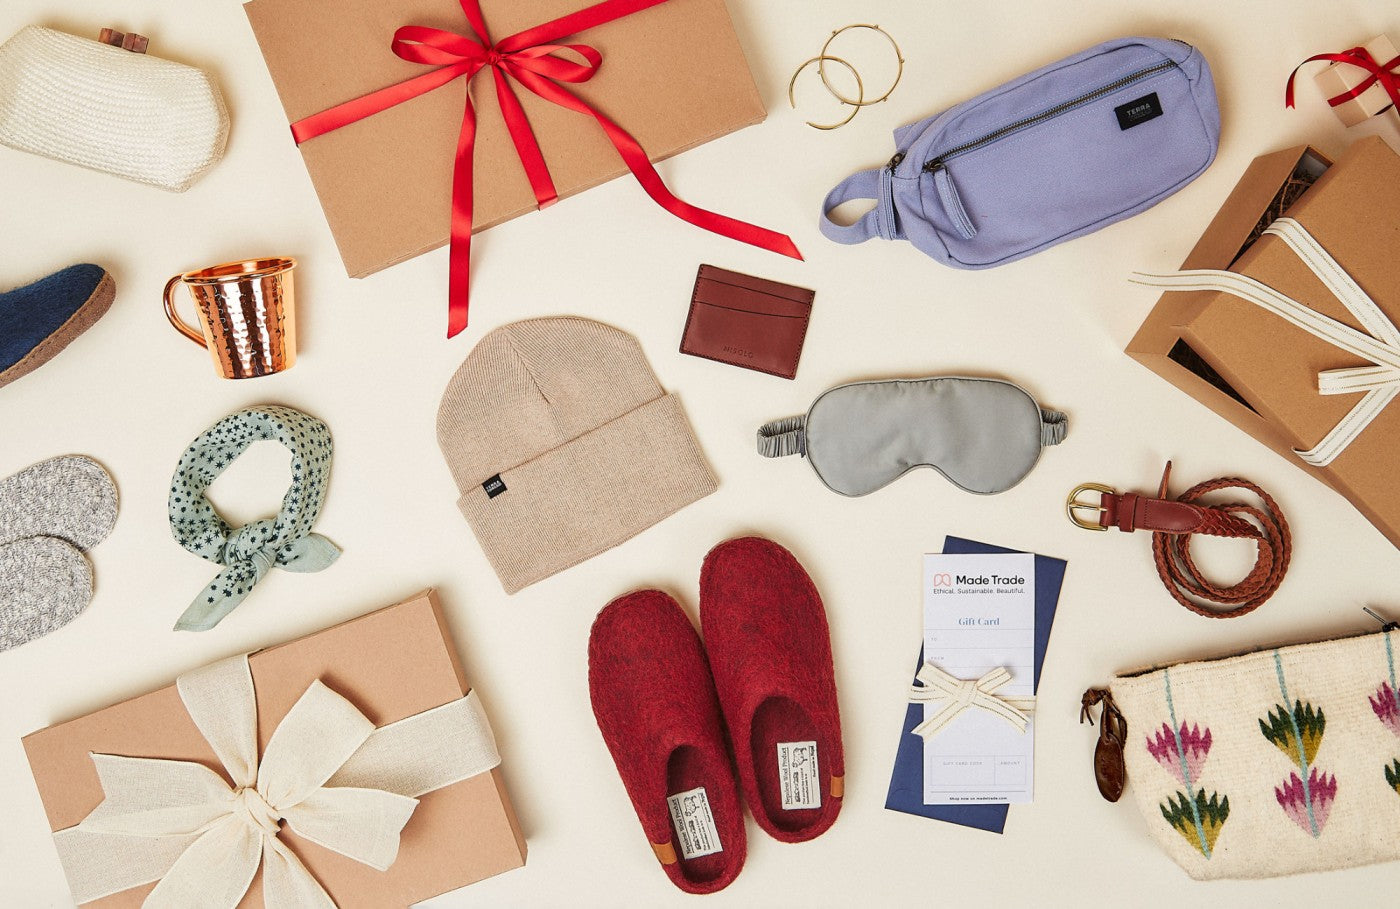 16 sustainable gift ideas for travelers 2022 - Lonely Planet